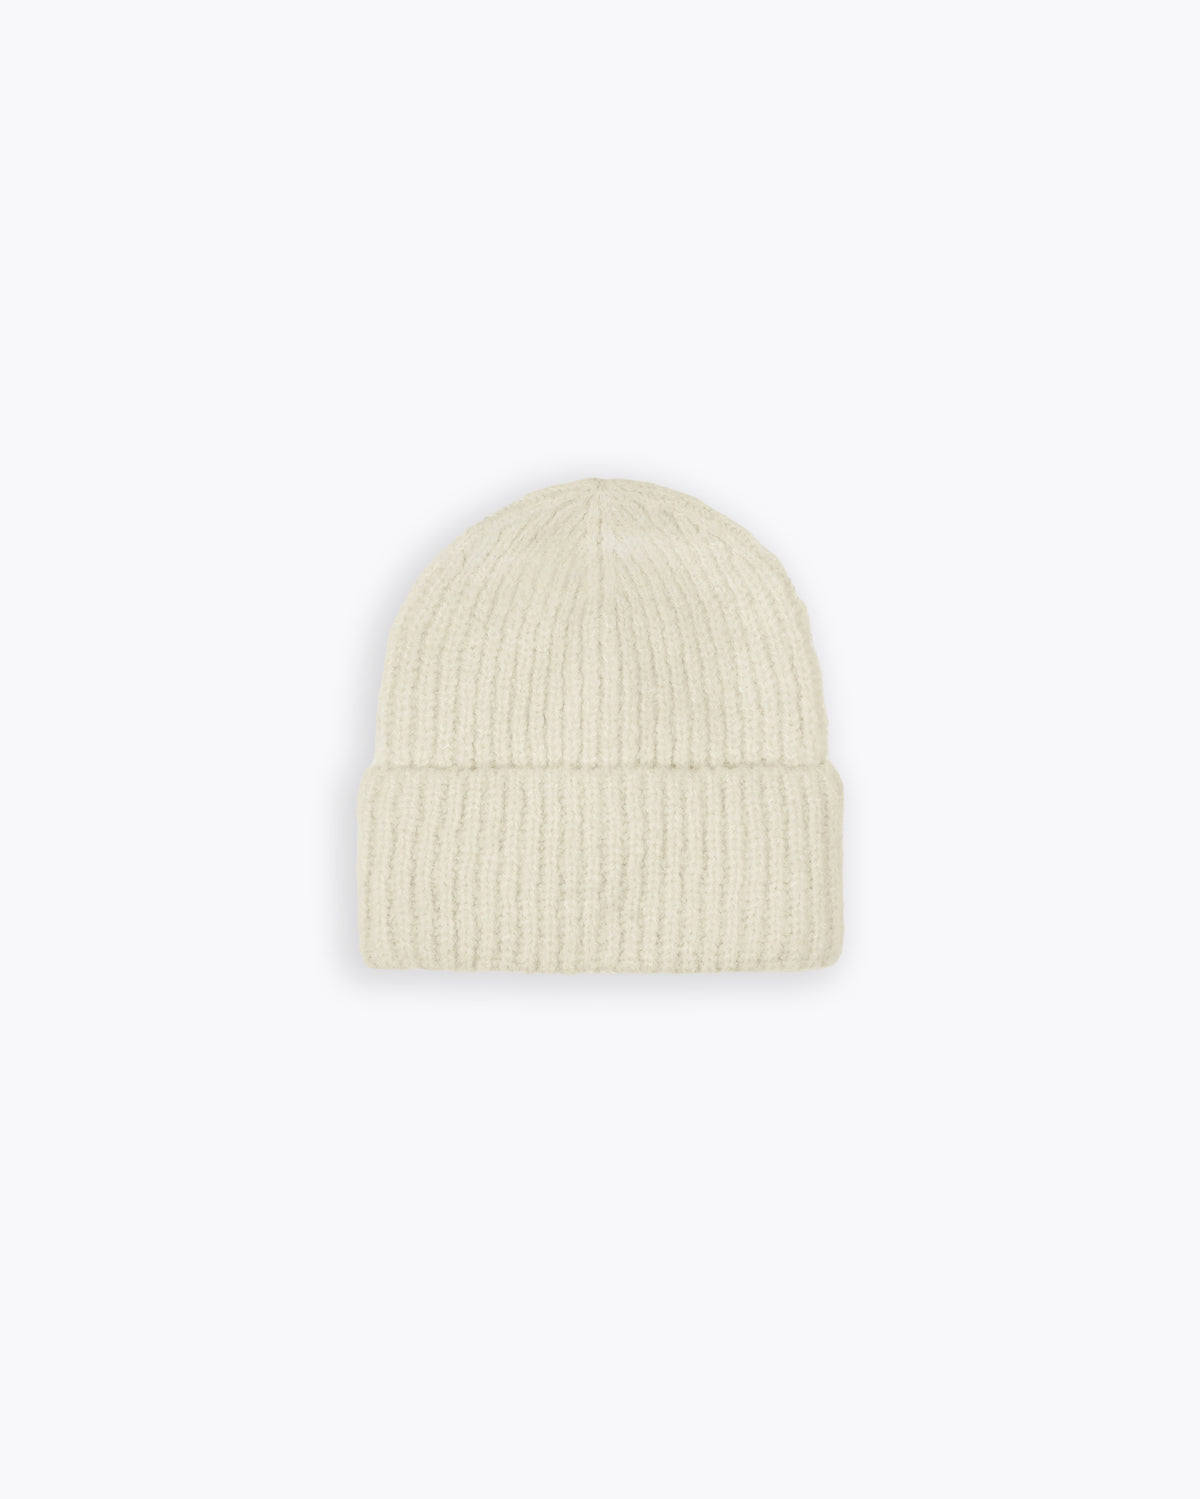 INFINITY HAT OFF WHITE